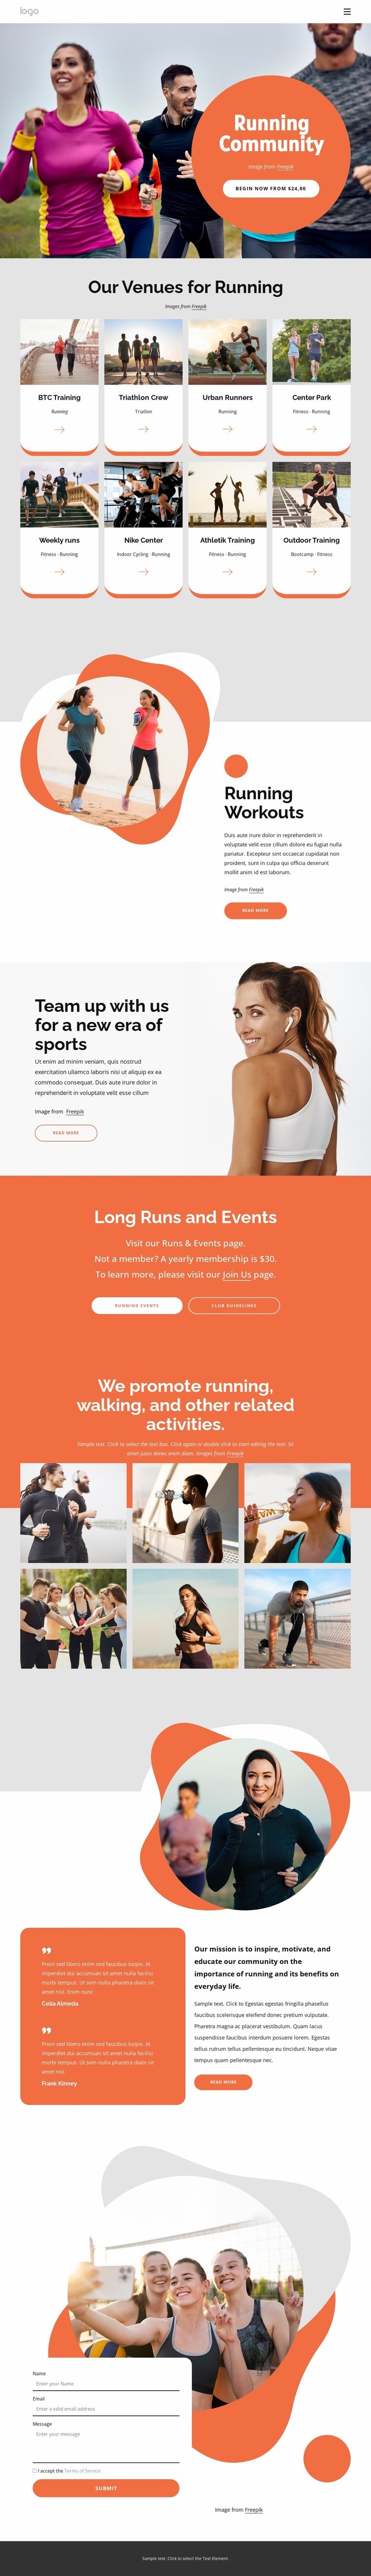 About Running Club Web Page Design